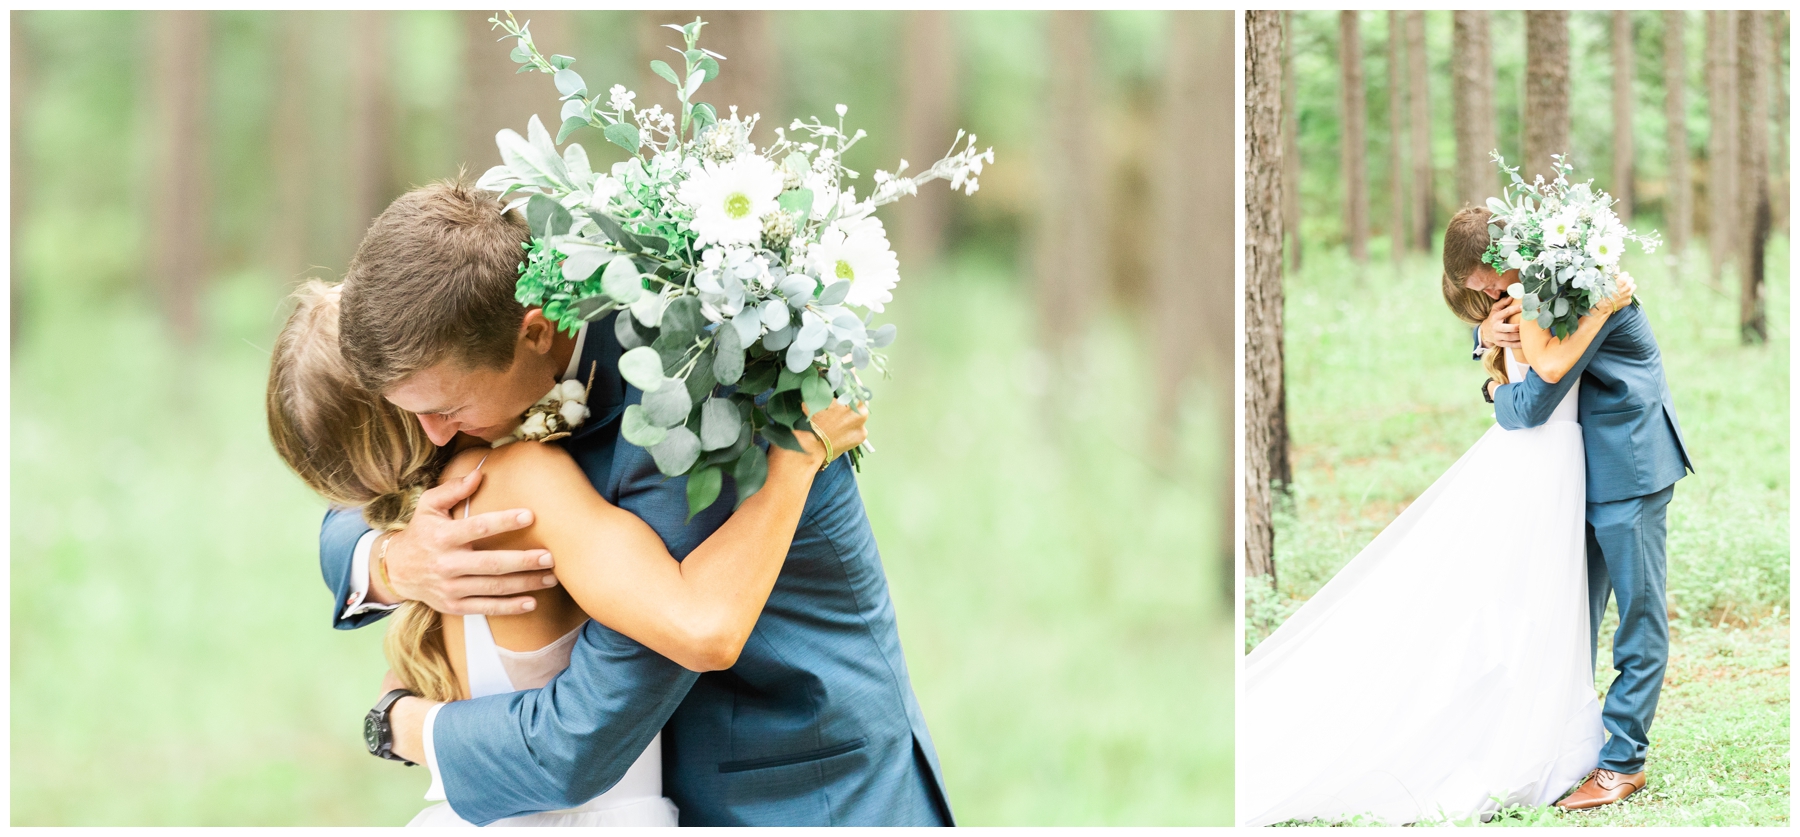 Georgia_Wedding_Photographer_Engaged_First Look_Second Shooter_Romantic_Bride_Groom